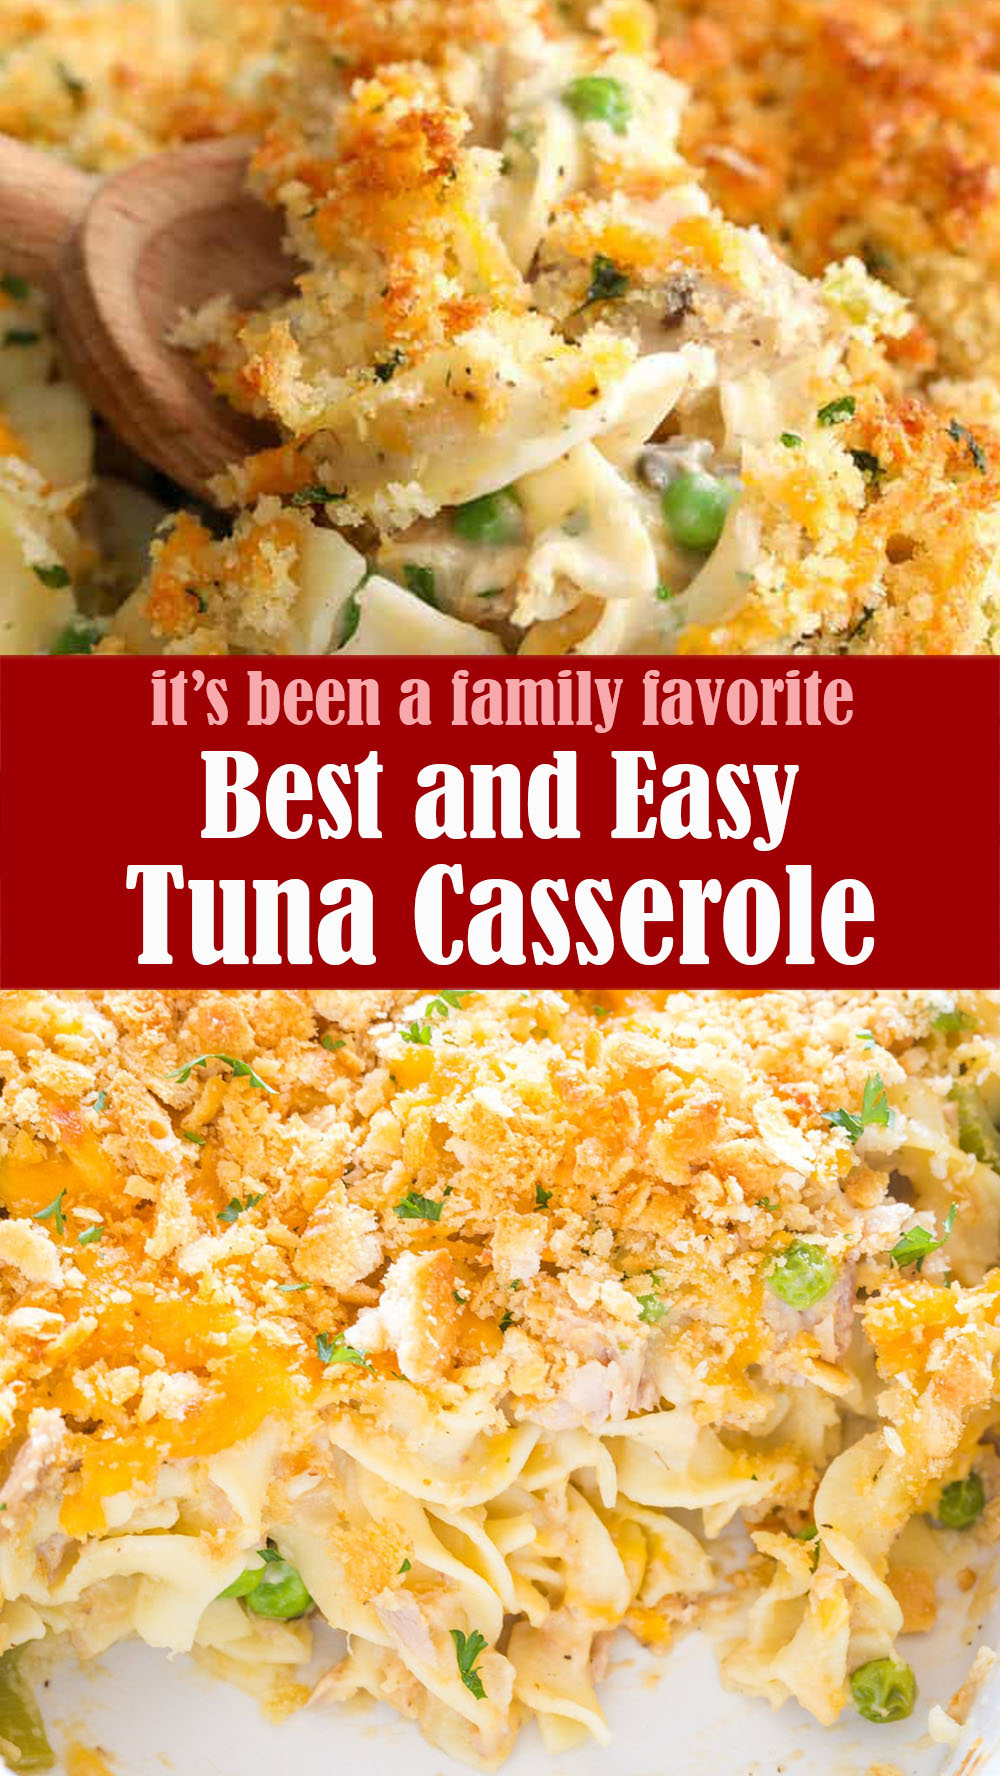 Best and Easy Tuna Casserole